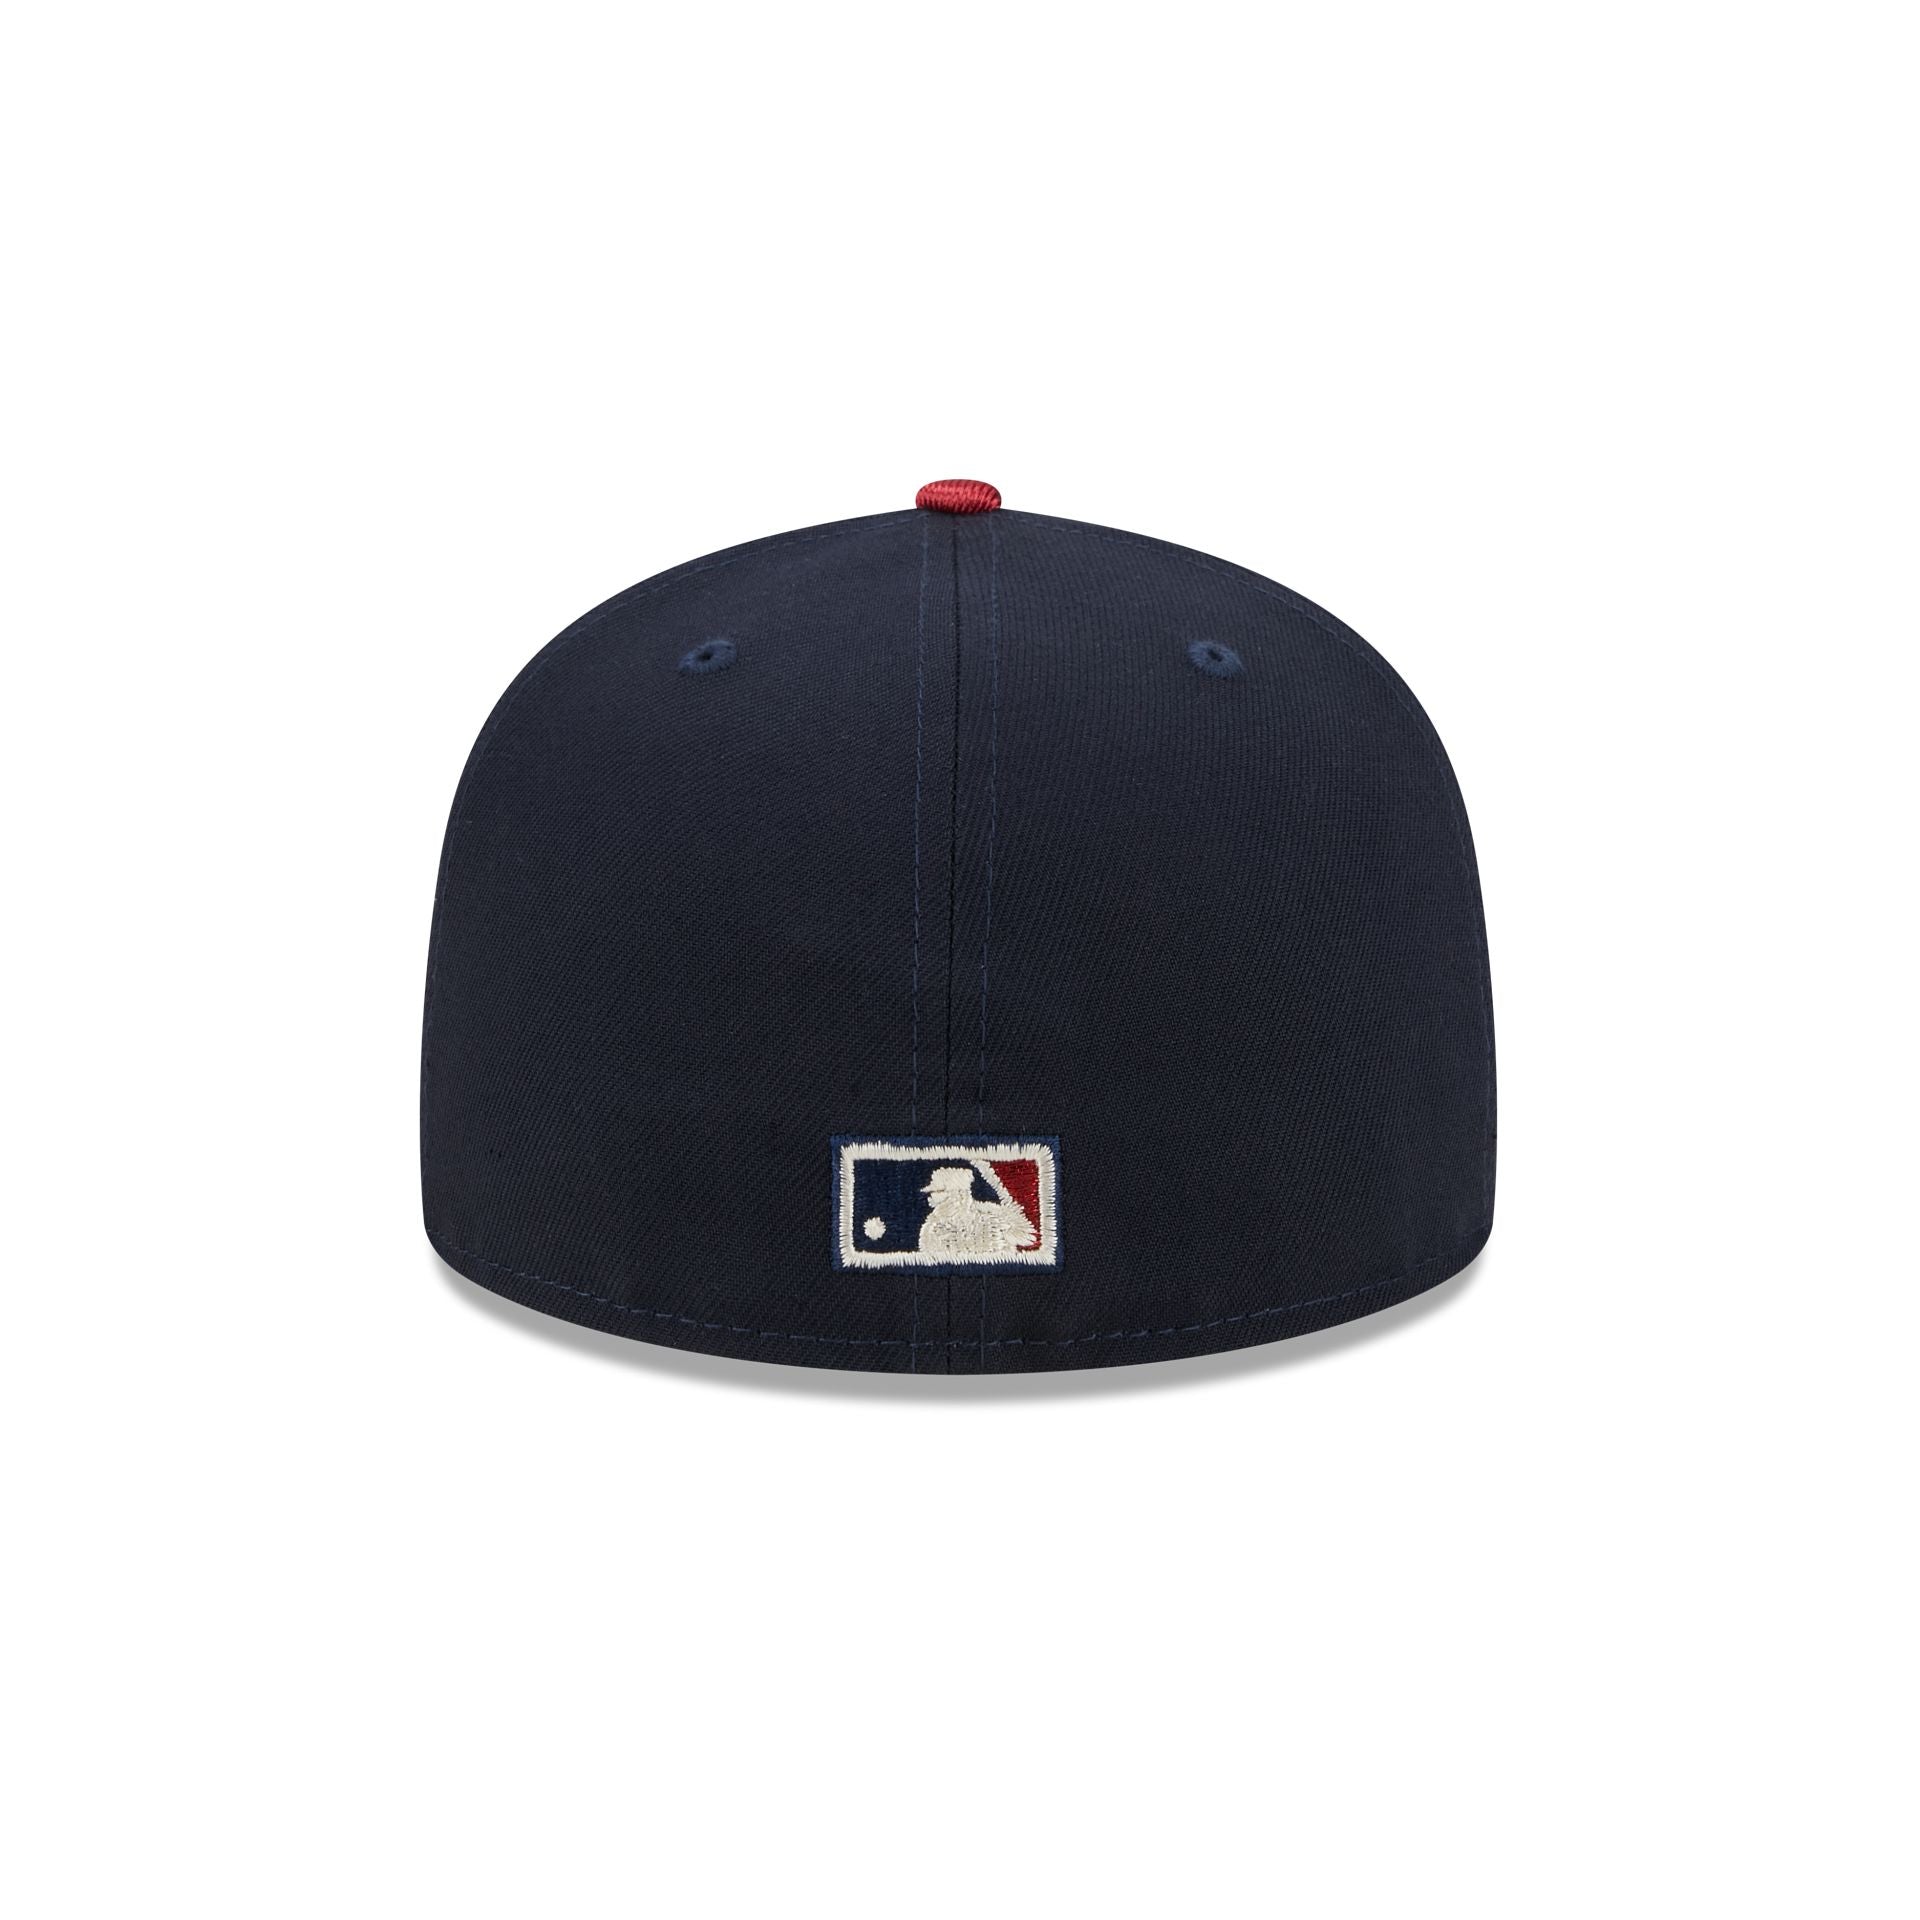 Atlanta Braves Team Shimmer 59FIFTY Fitted Hat